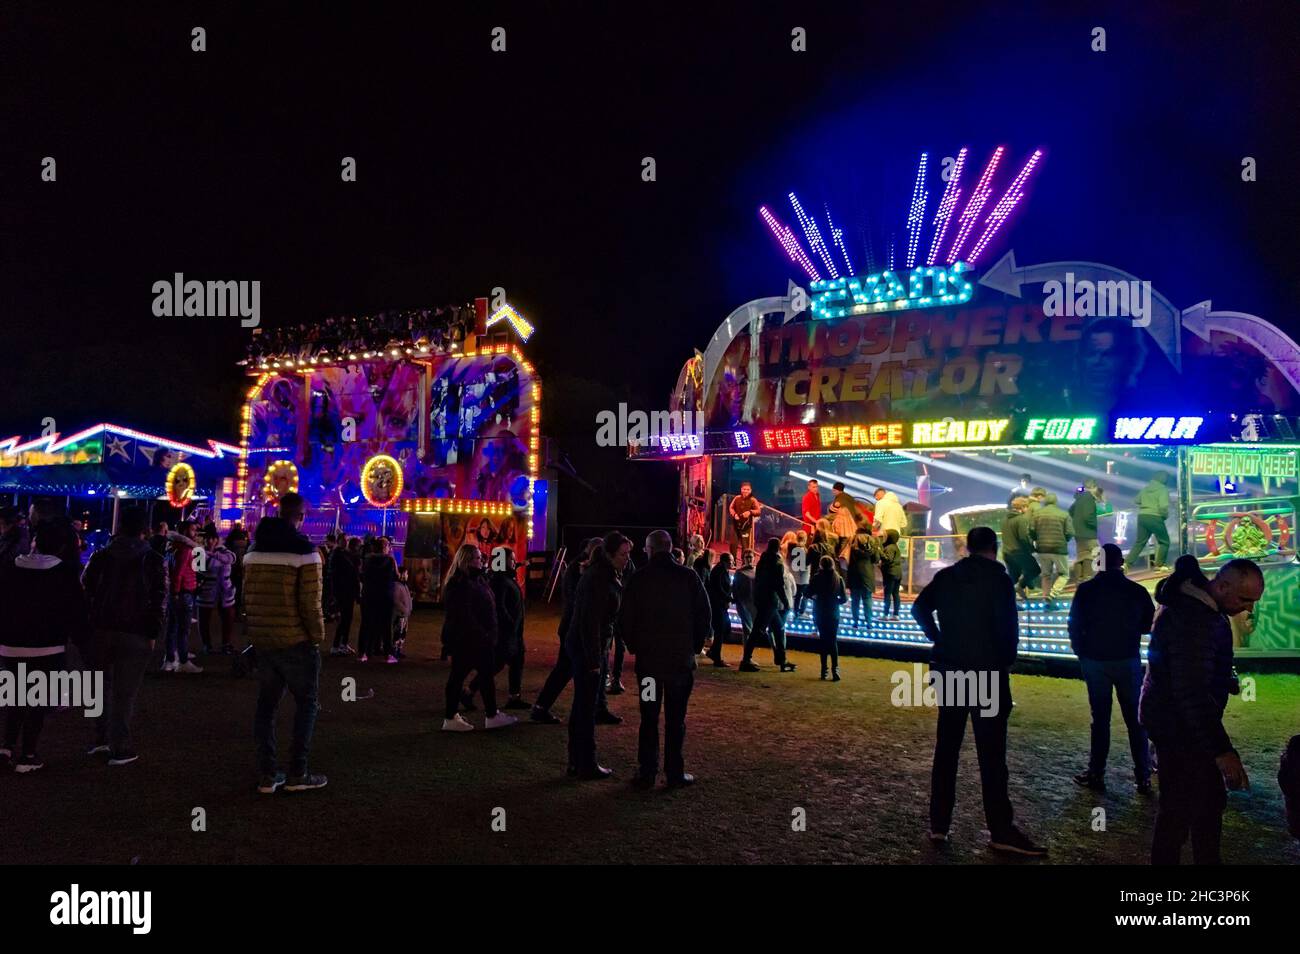 people enjoying the arcades at the night time funfair in the park Stock Photo